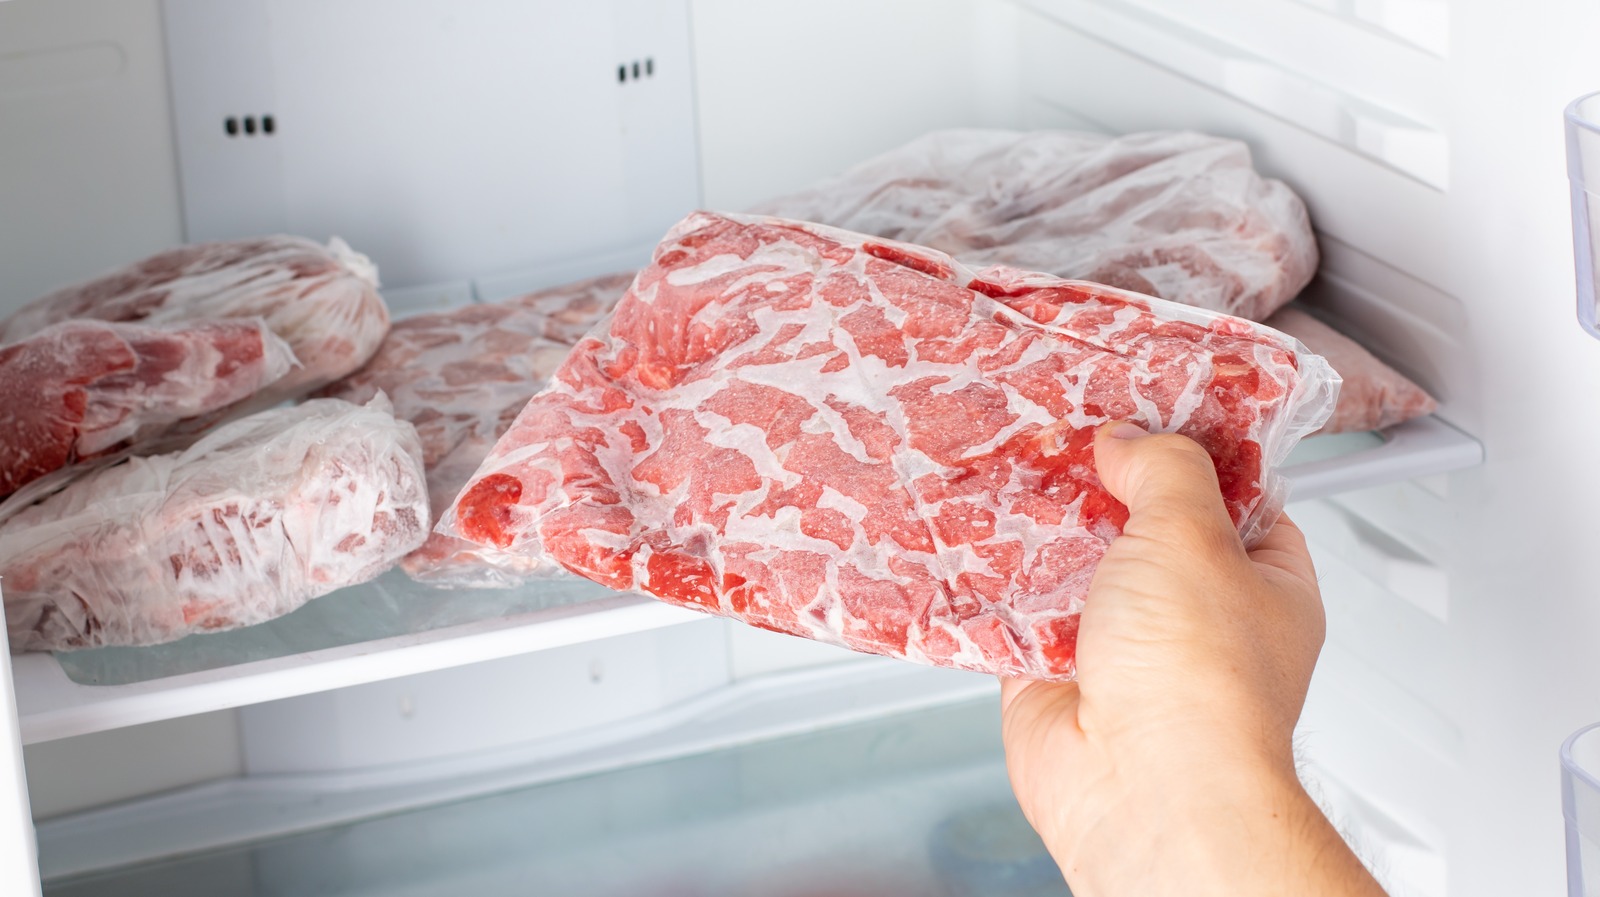 Frozen meat in a plastic bag. A piece of frozen meat wrapped in a